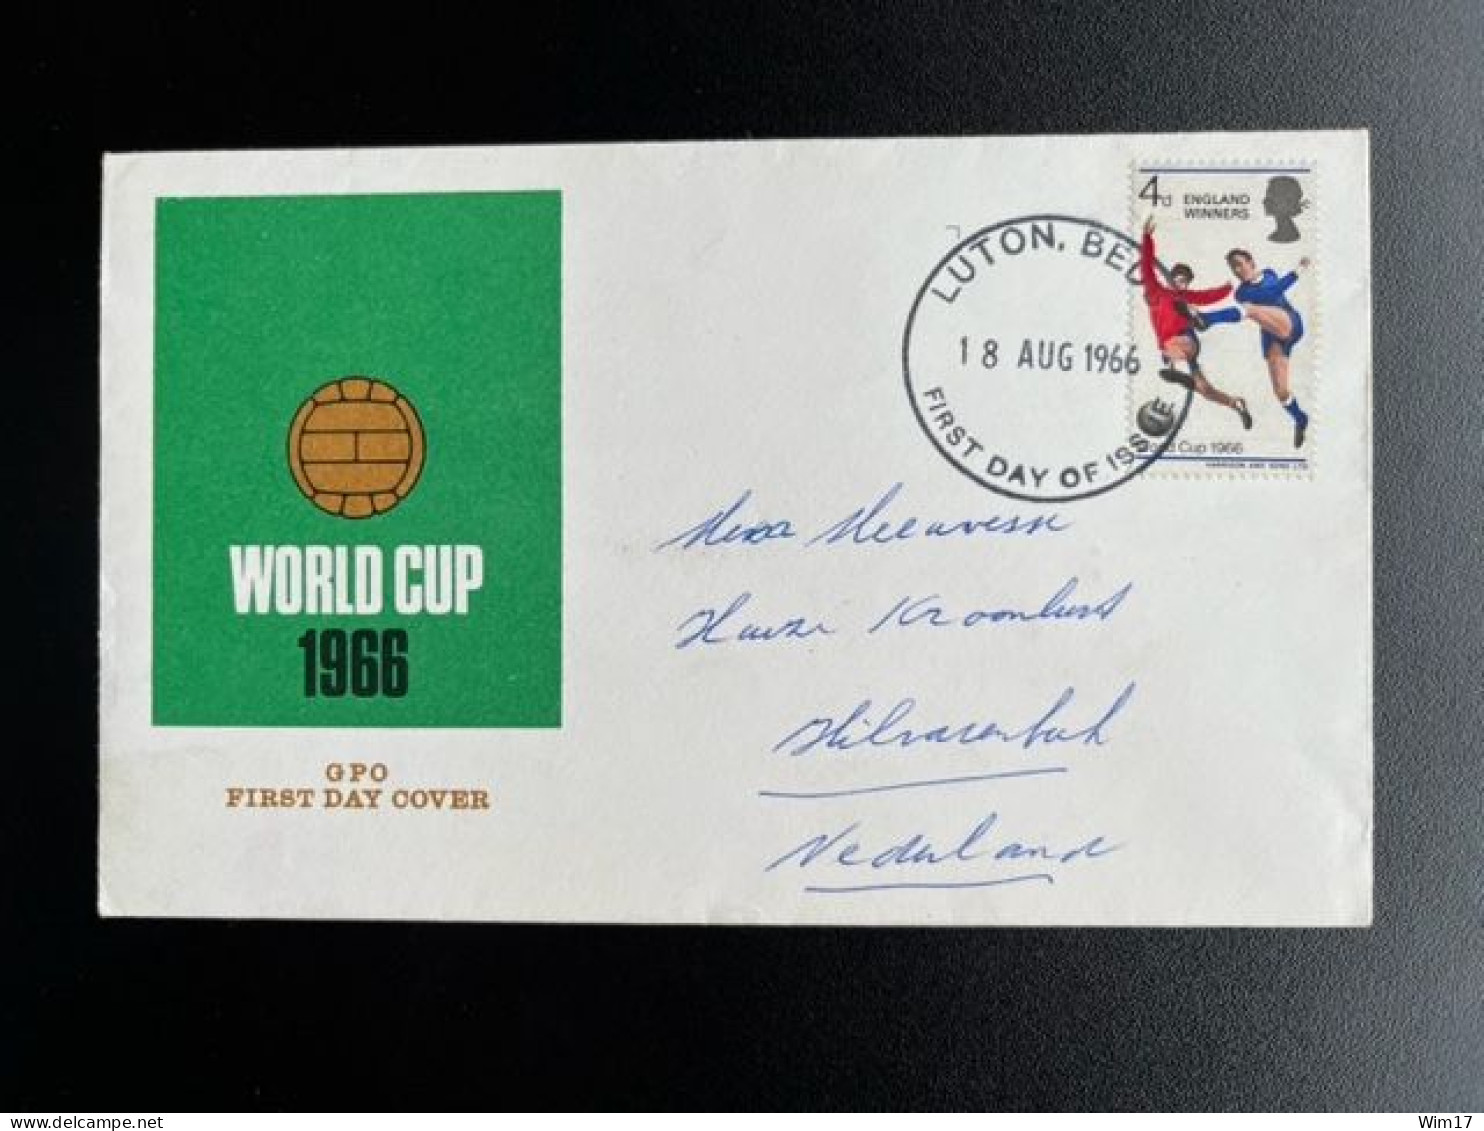 GREAT BRITAIN 1966 CIRCULATED FDC WORLD CUP FOOTBALL ENGLAND WINNERS 18-08-1966 GROOT BRITTANNIE - 1952-1971 Pre-Decimal Issues